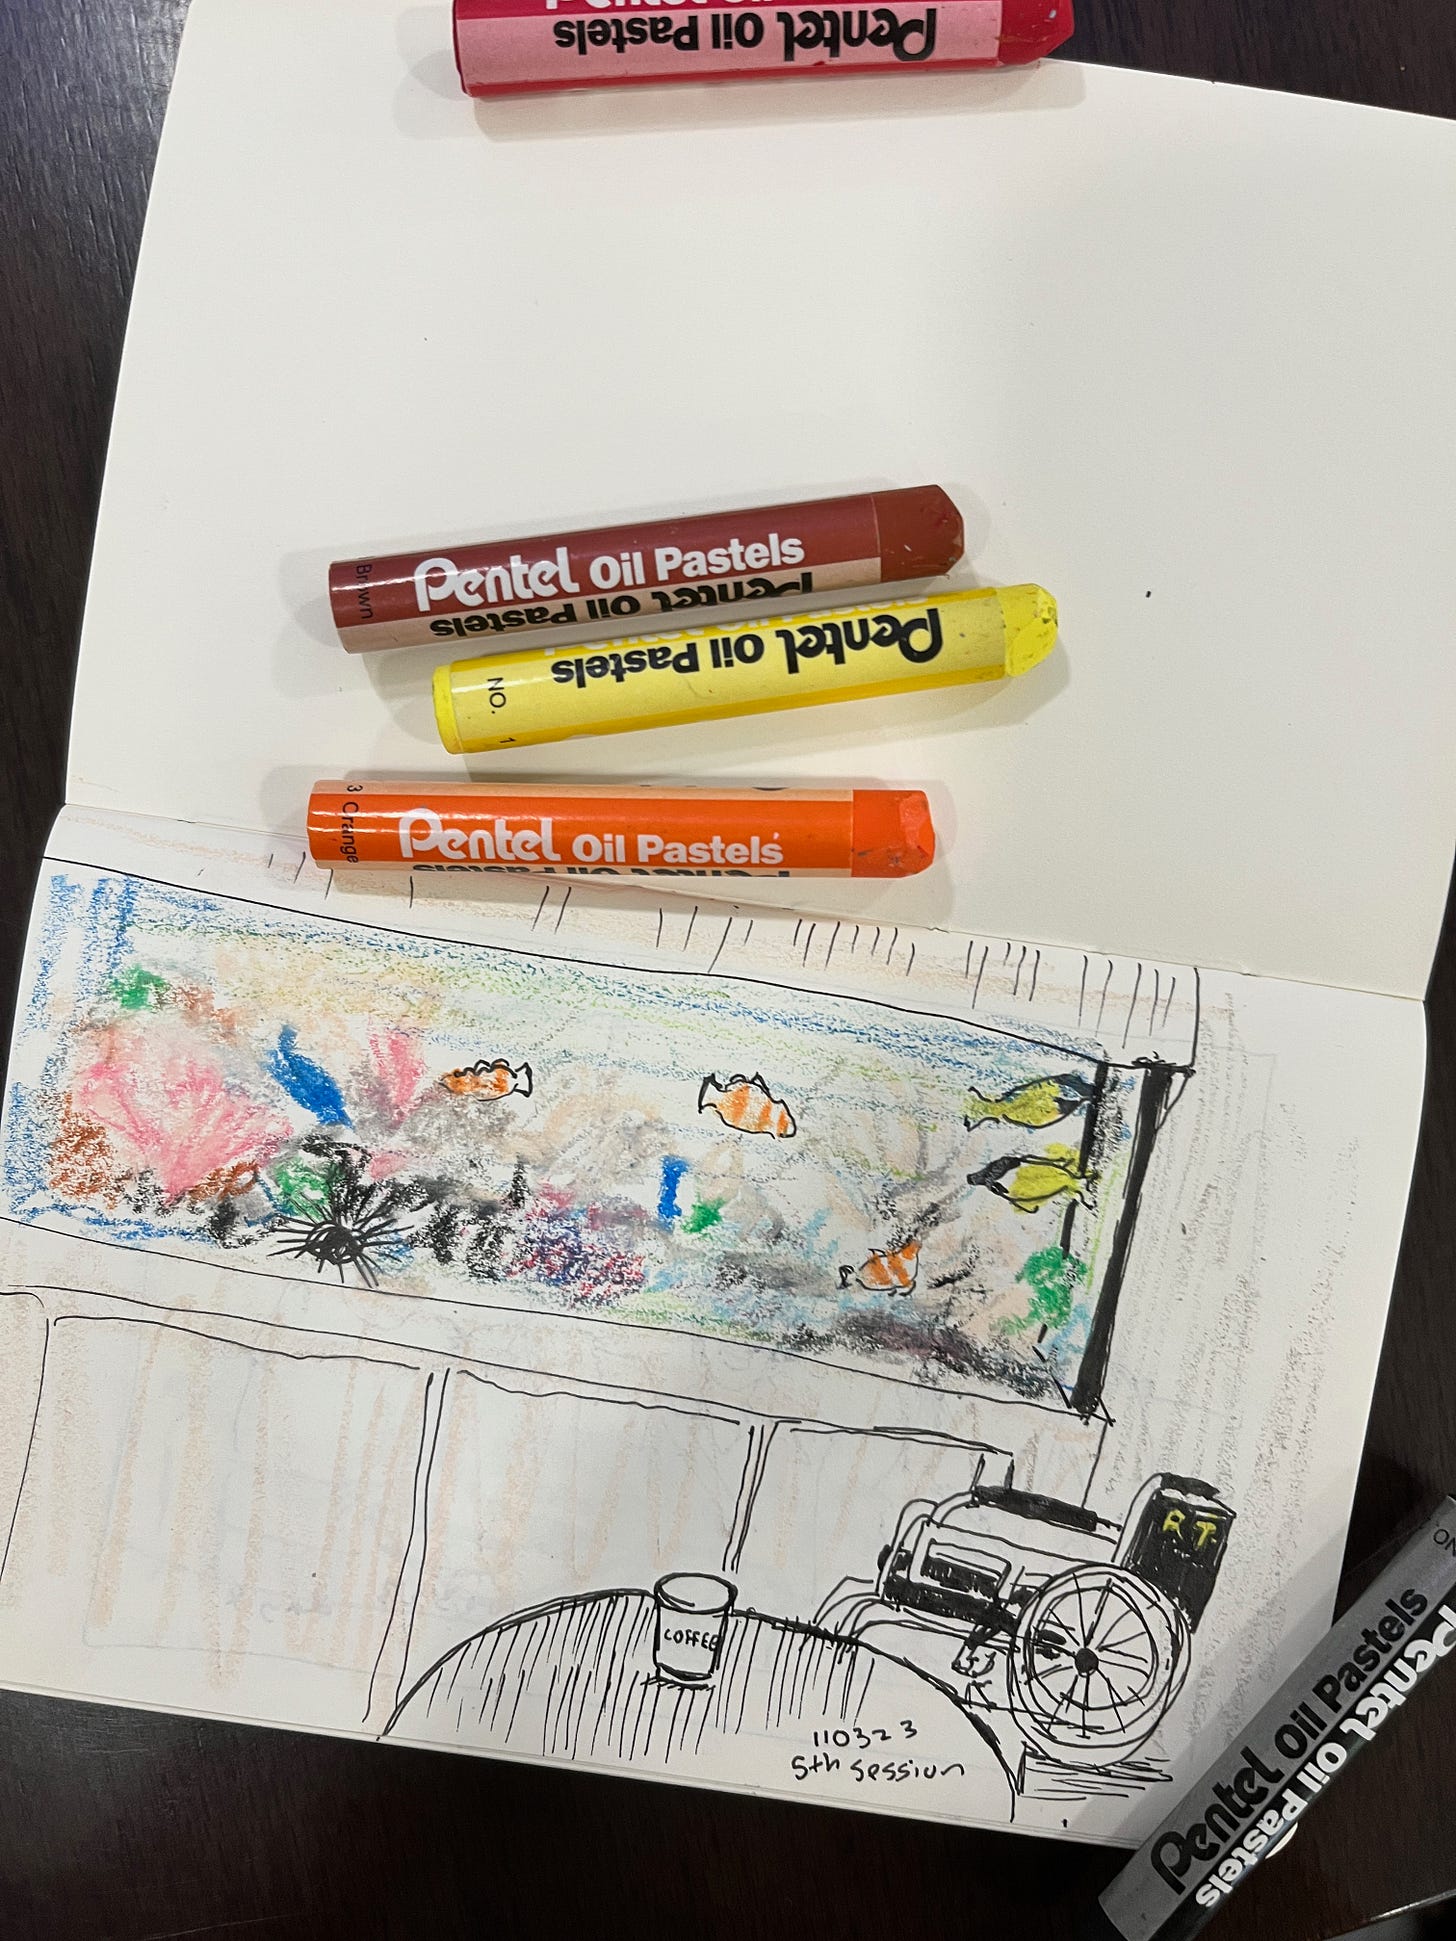 image: pen and crayon sketch of an aquarium with fish and corals, a table in front, and a folded wheelchair